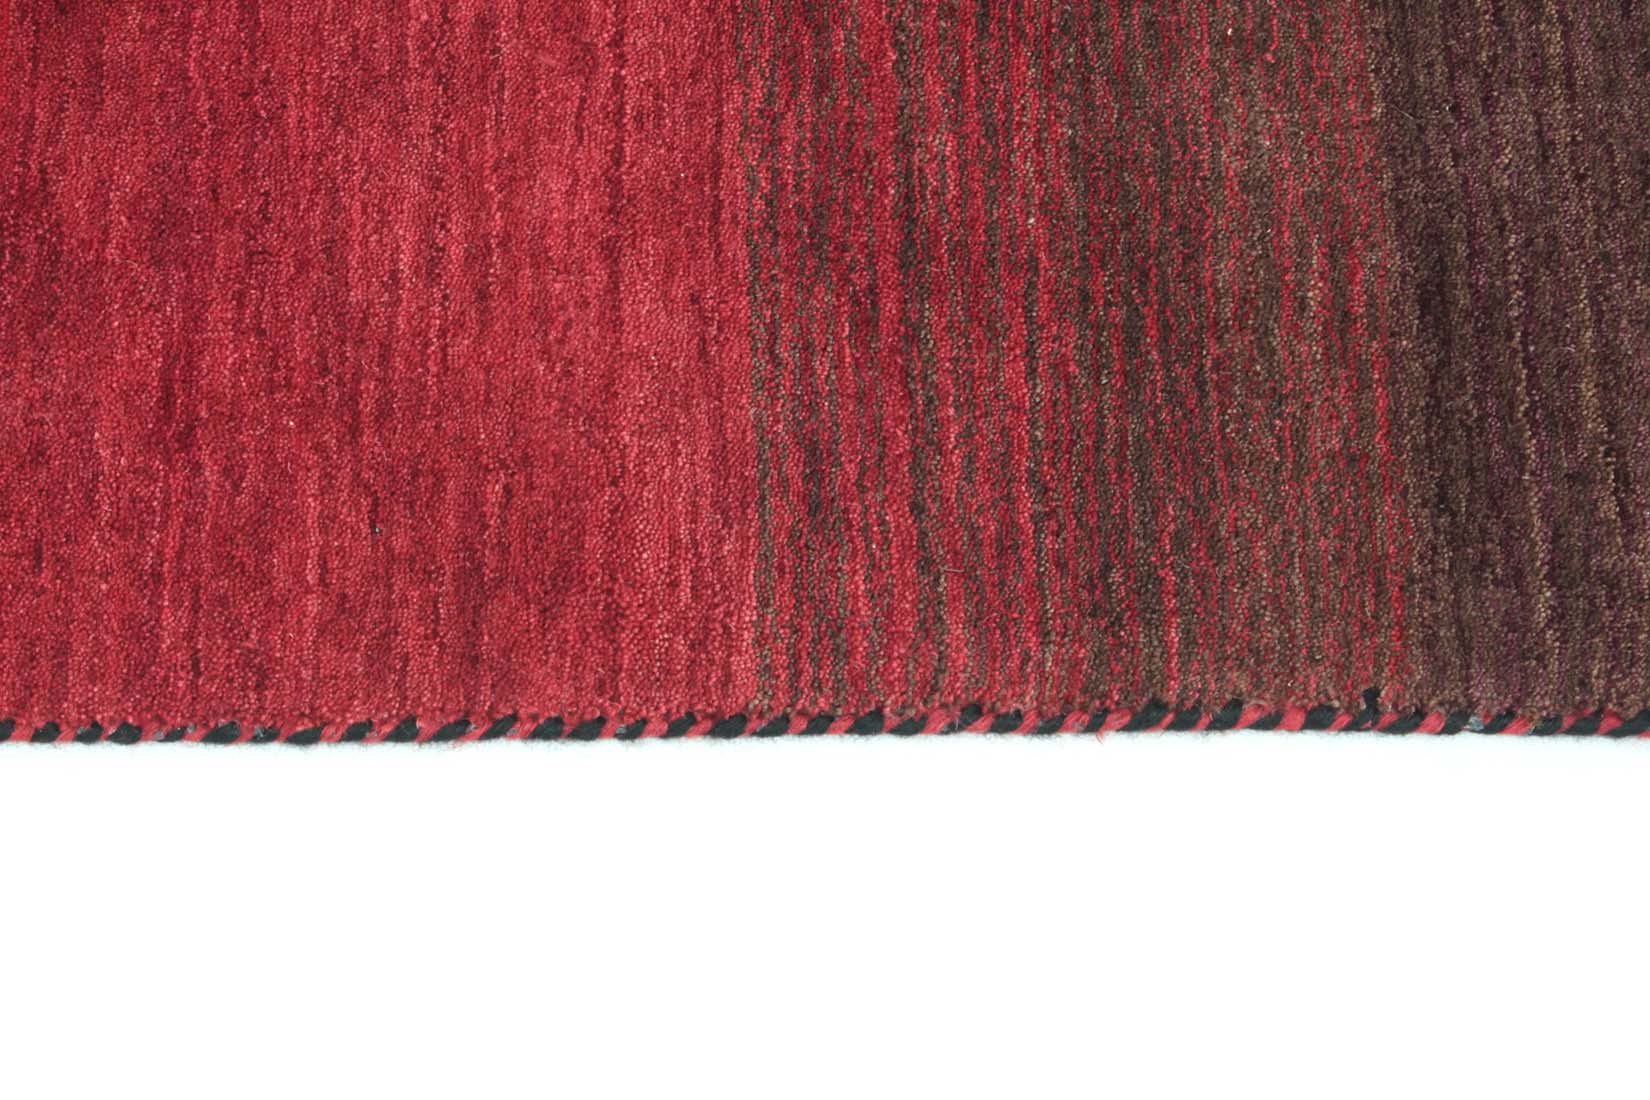 red and black ombre rug
